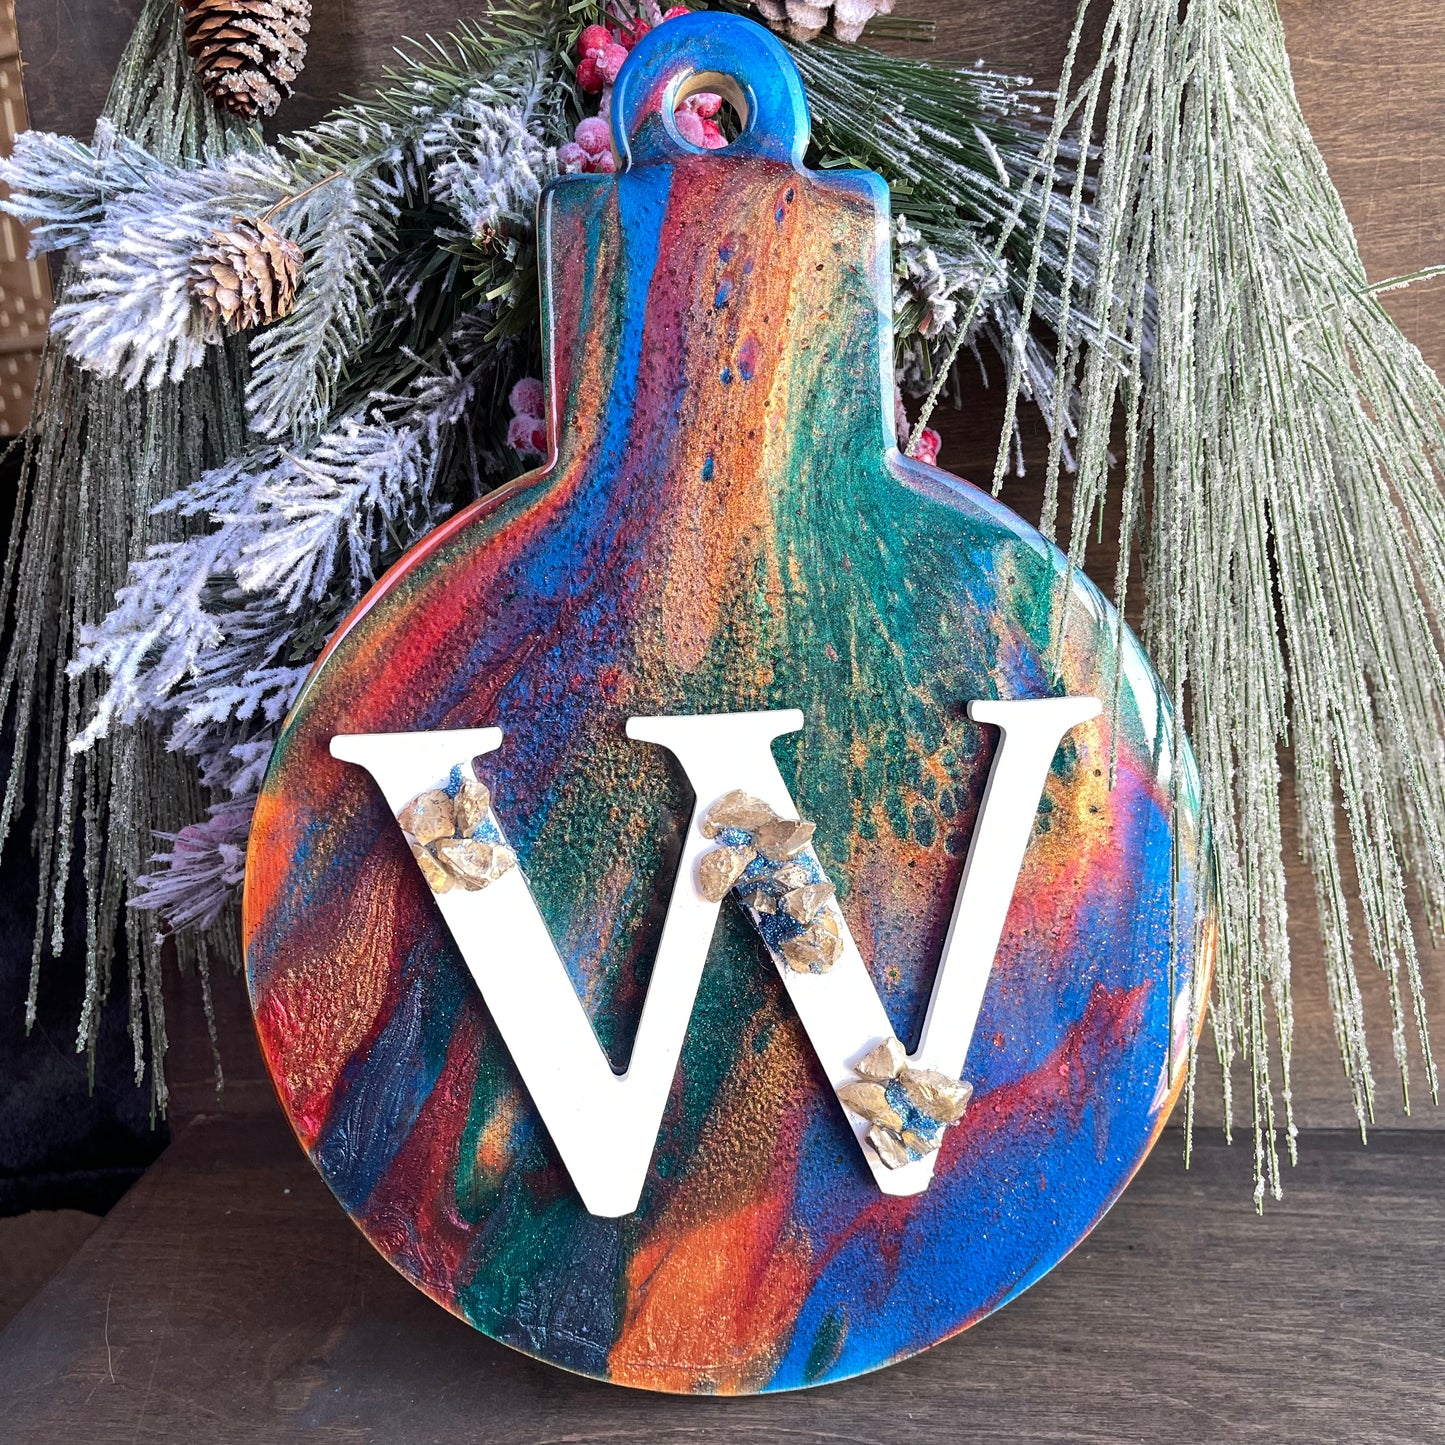 Resin Monogrammed Ornament board - 12/02 @ 1pm (personalized with your initial)I